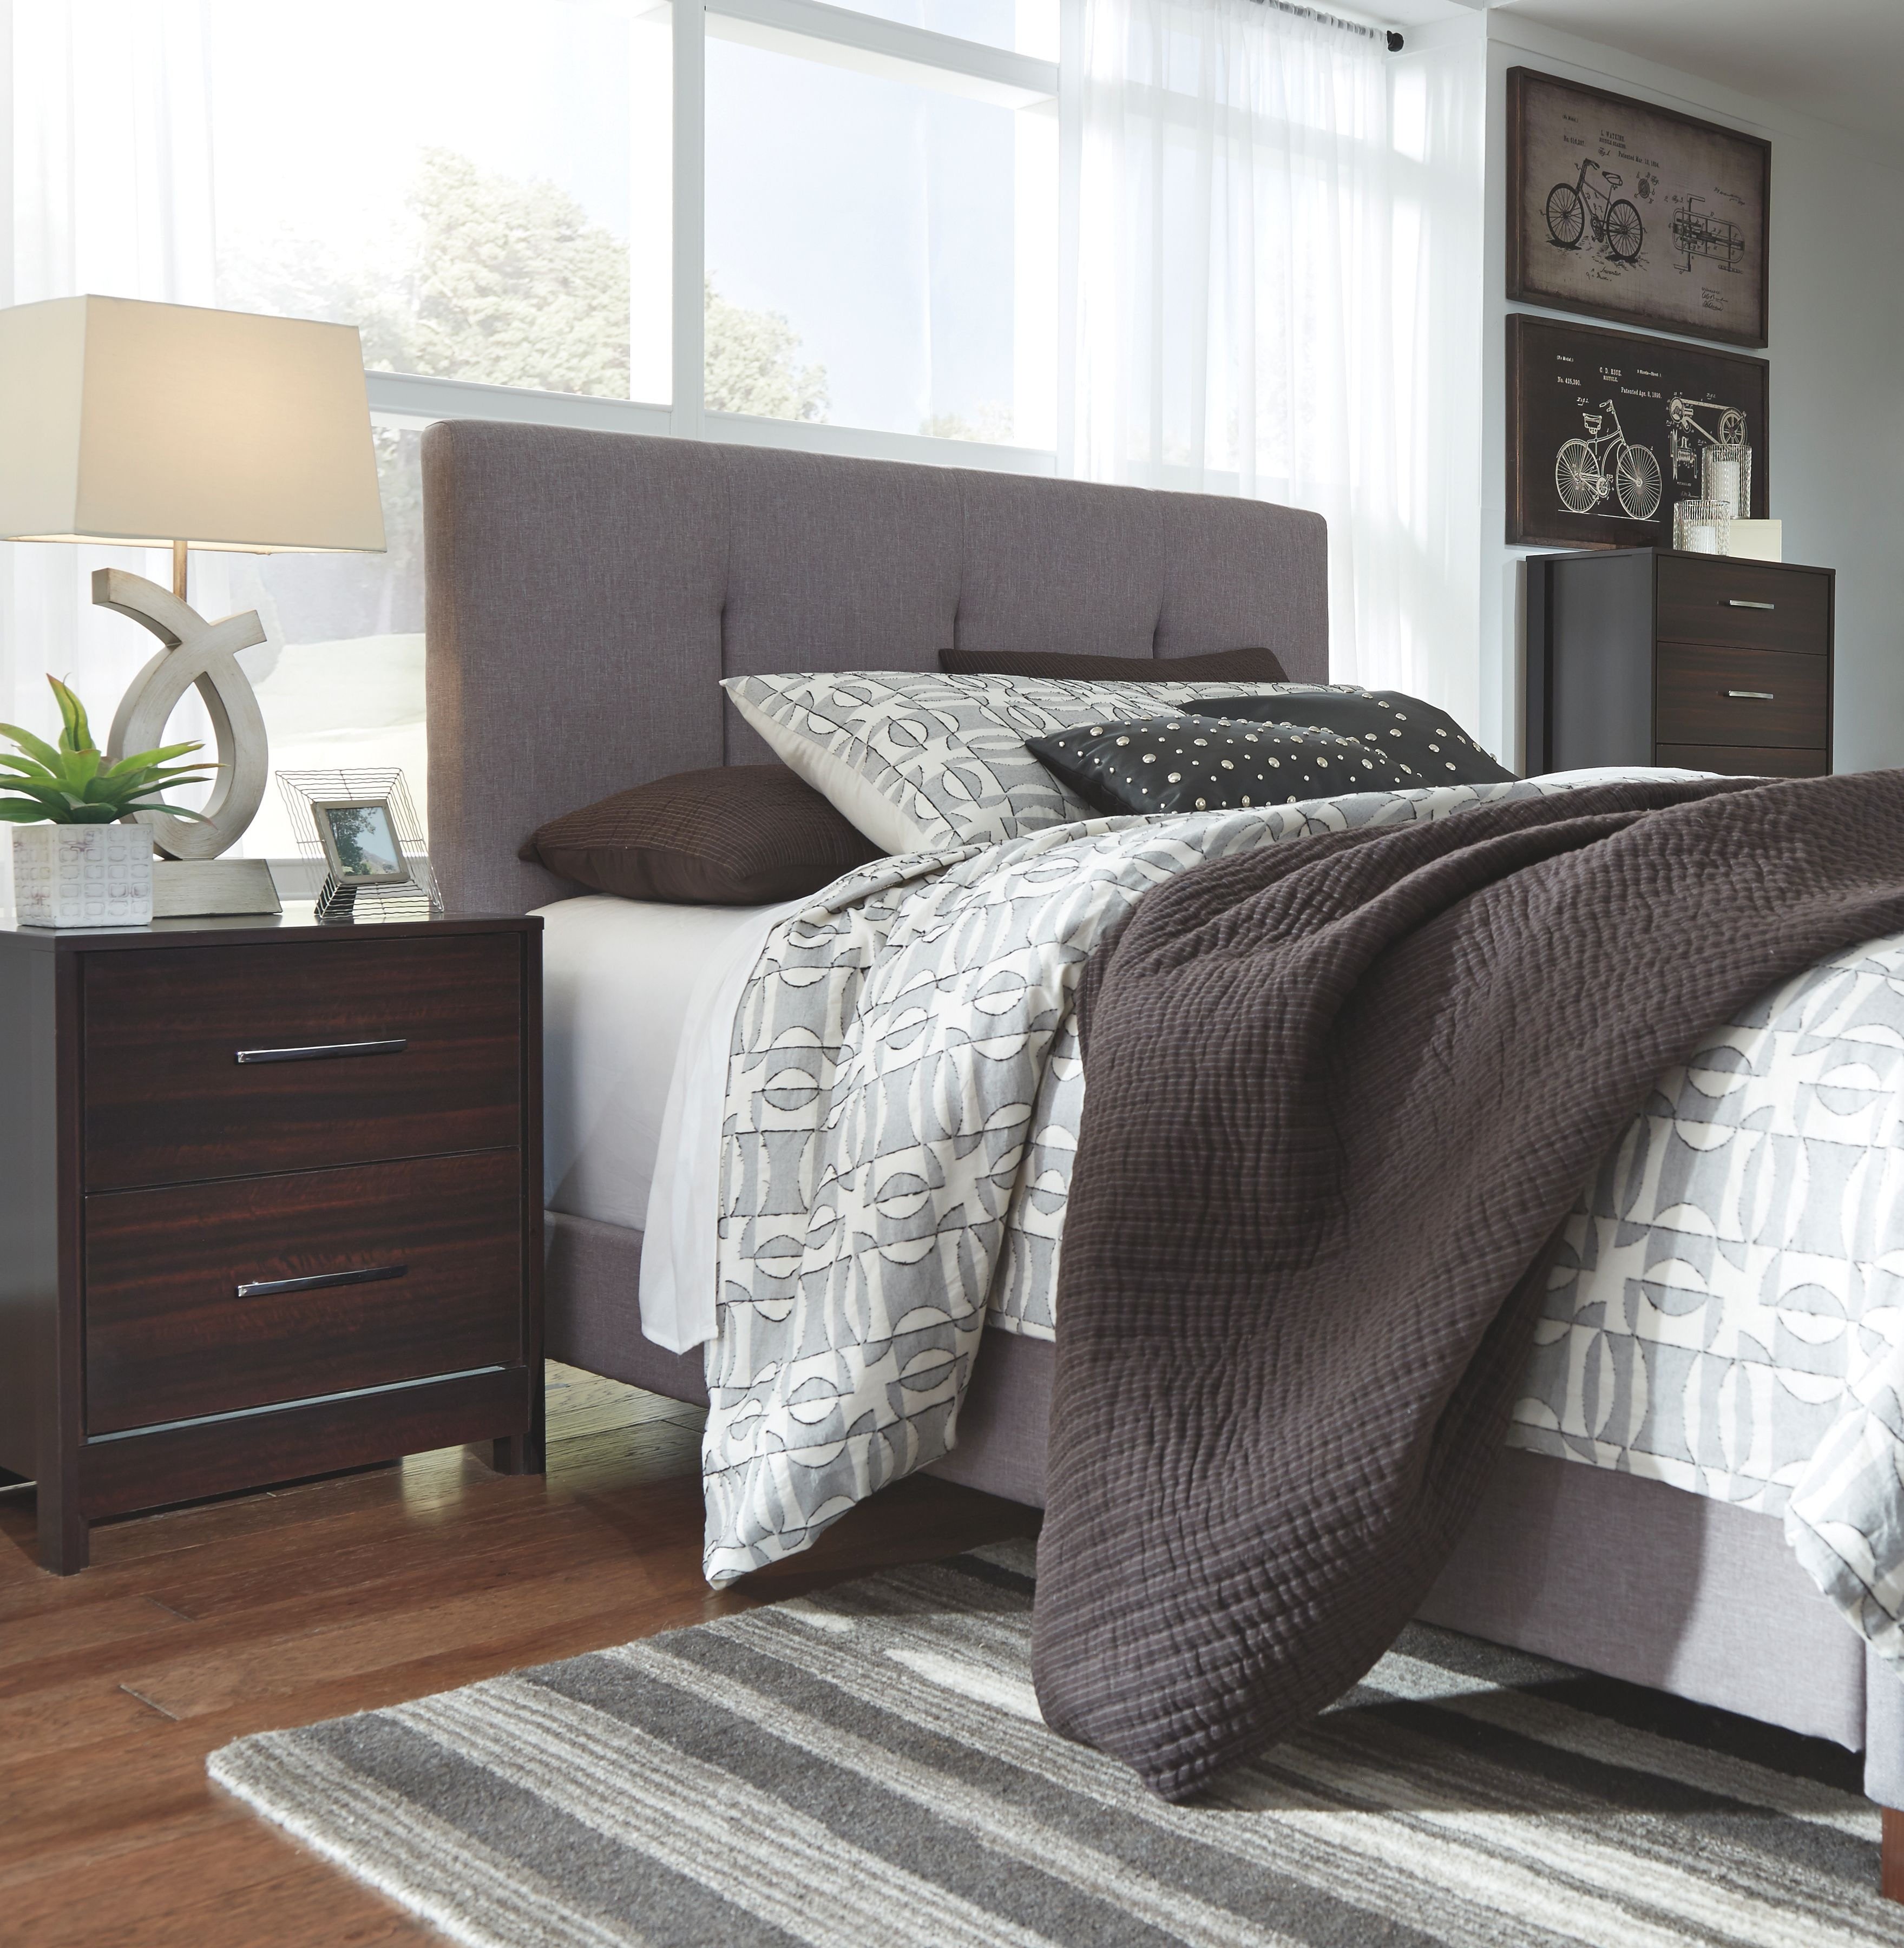 Lazy Boy Bedroom Furniture Lovely Signature Design by ashley Bedroom Dolante Queen Upholstered